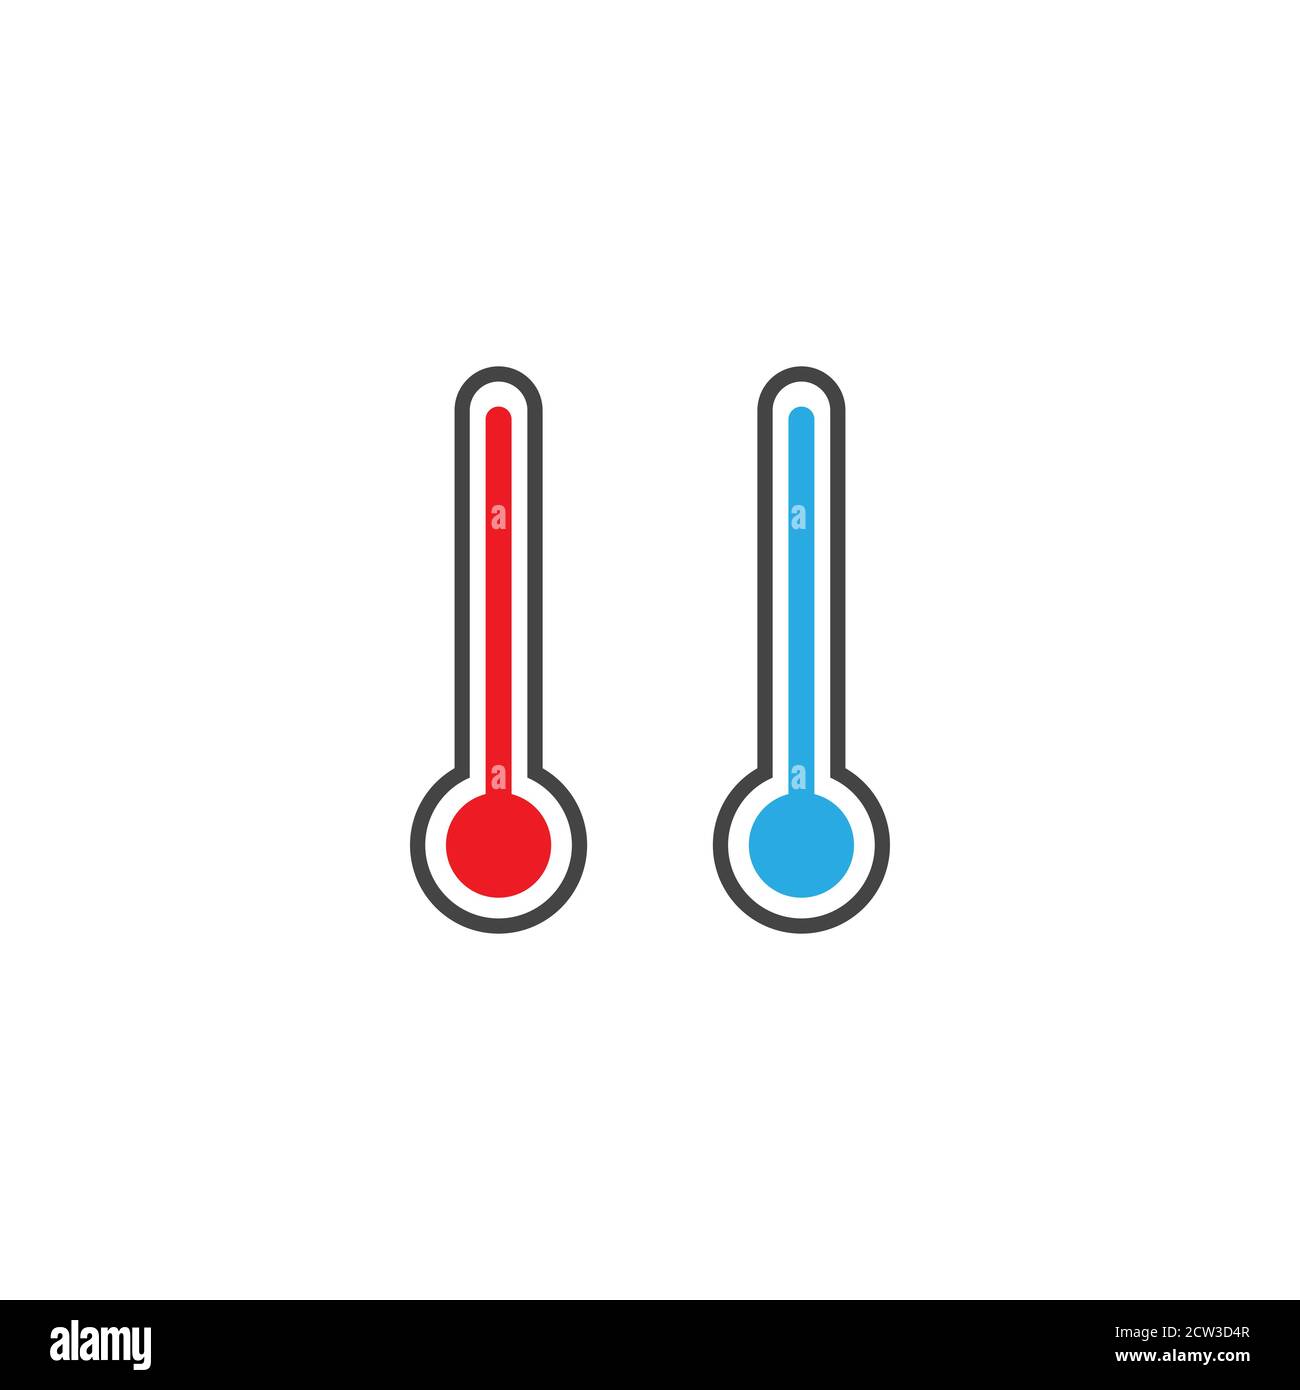 https://c8.alamy.com/comp/2CW3D4R/thermometer-icons-set-isolated-on-white-temperature-gauge-high-and-low-temperature-illness-cold-fever-heat-cartoon-vector-illustration-2CW3D4R.jpg